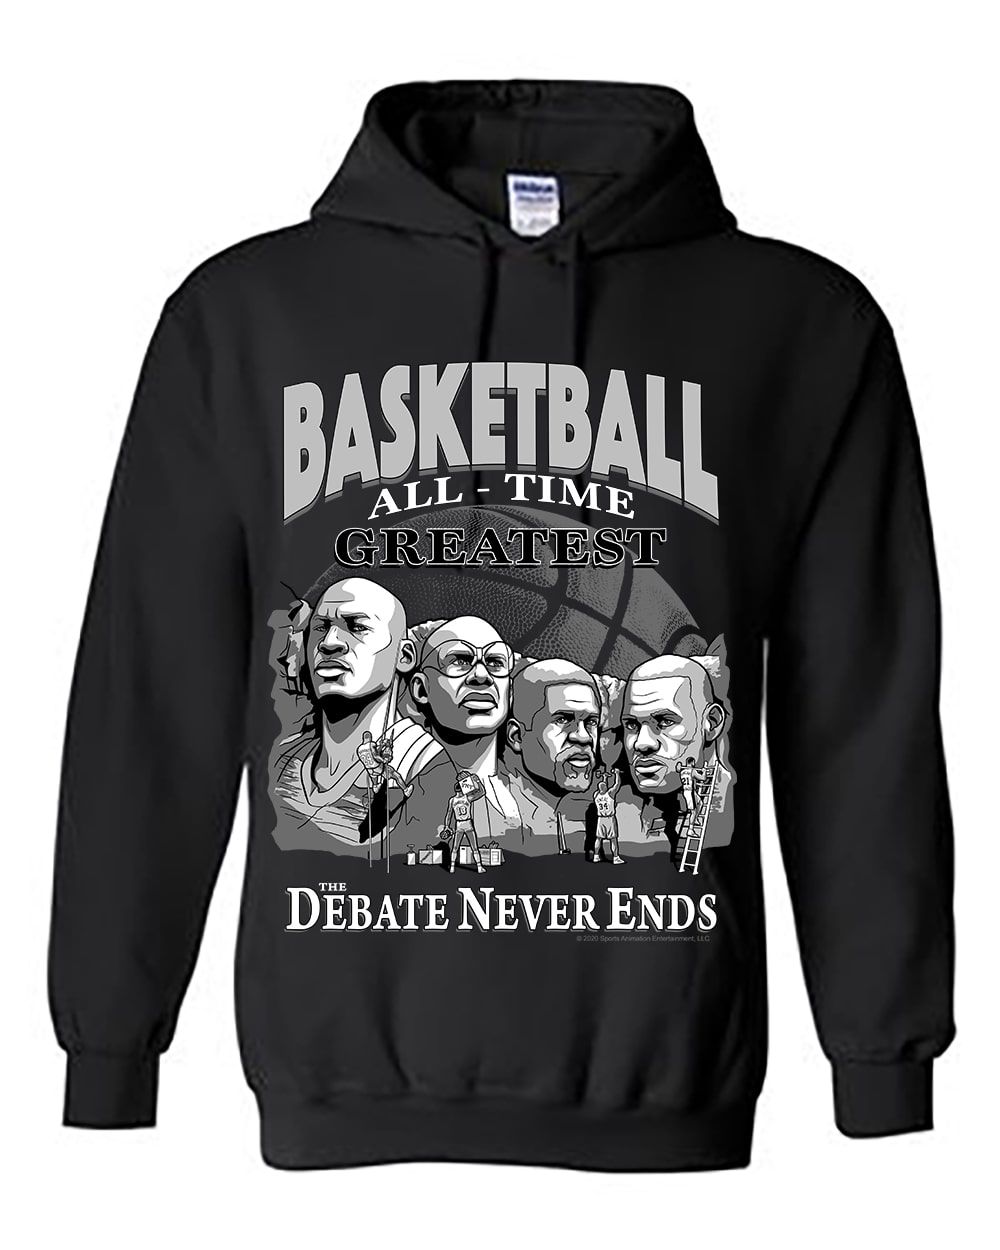 Mount Rushmore - Basketball All-Time Greatest (Black Heavy Duty Hoodie)